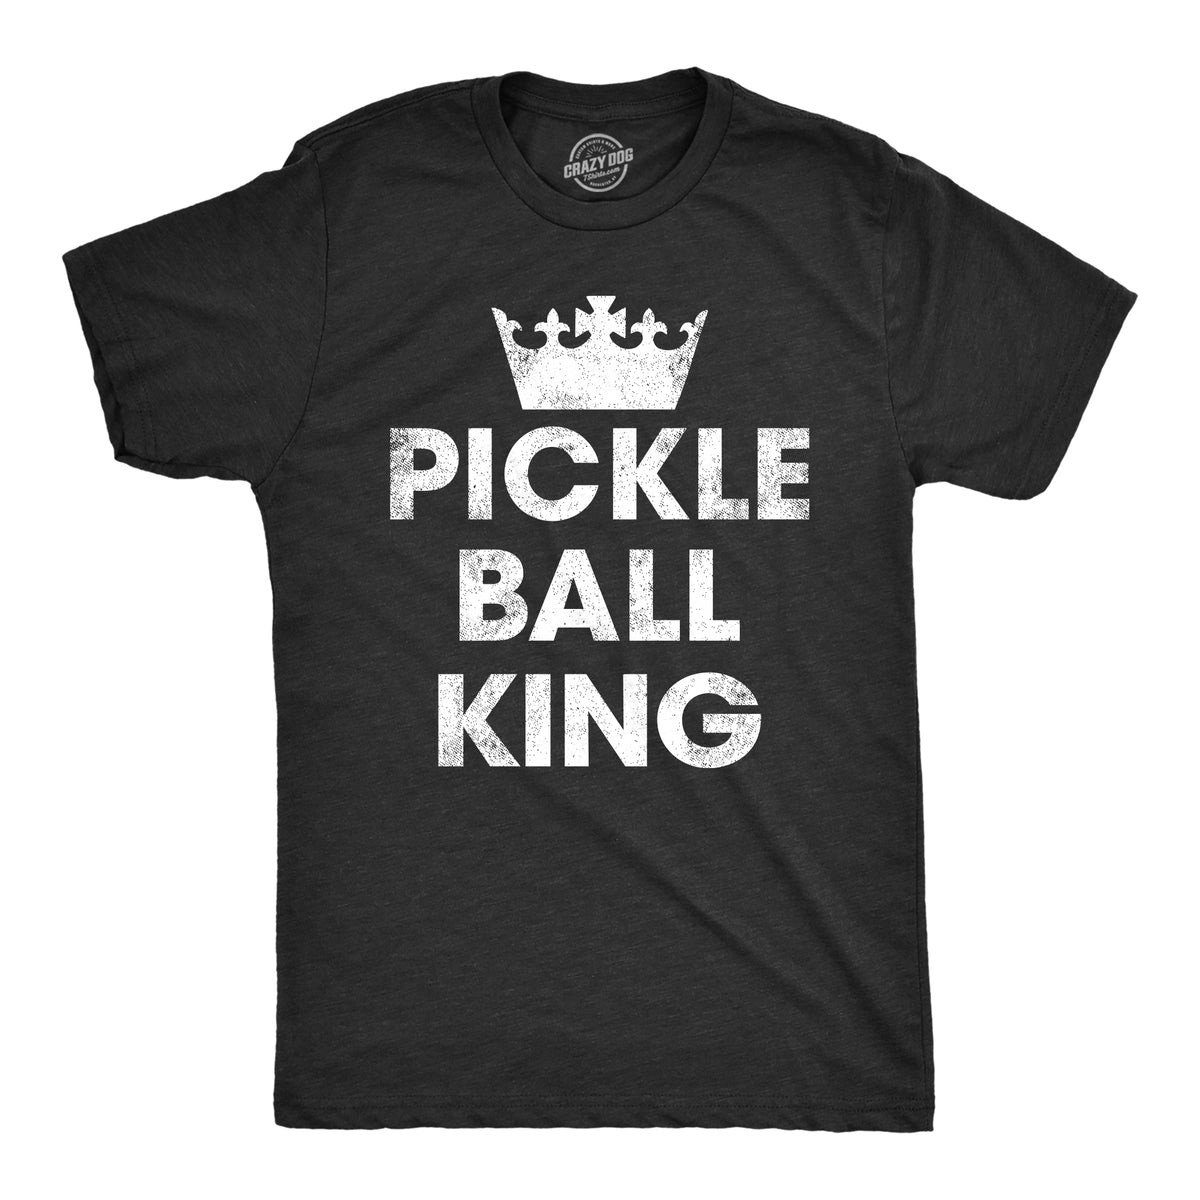 Funny Heather Black - PICKLE Pickle Ball King Mens T Shirt Nerdy sarcastic Tee